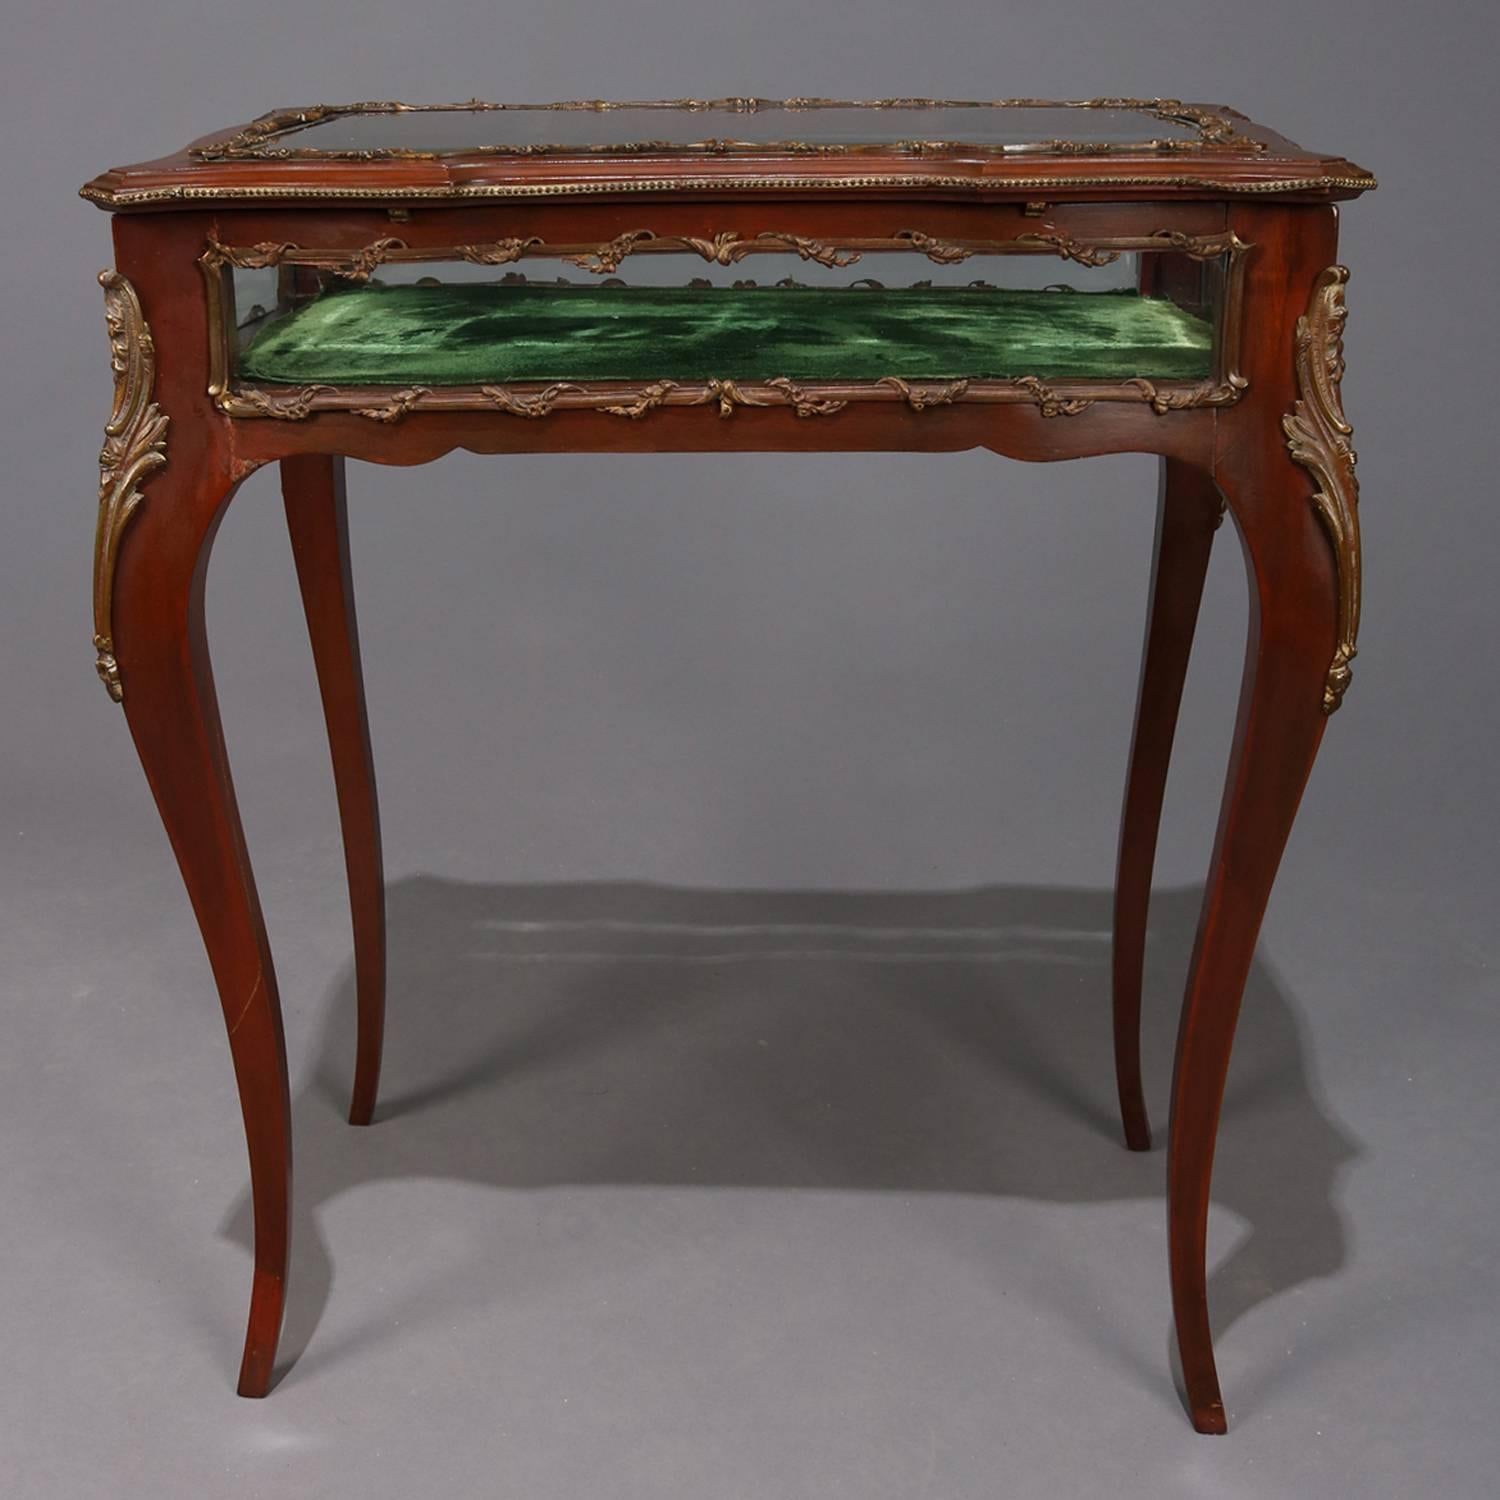 Antique French Louis XIV style lift top velvet lined vitrine curio cabinet table features shaped mahogany display case having beveled glass top with foliate cast bronze framed viewing windows and seated on cabriole legs with cast acanthus mounts,